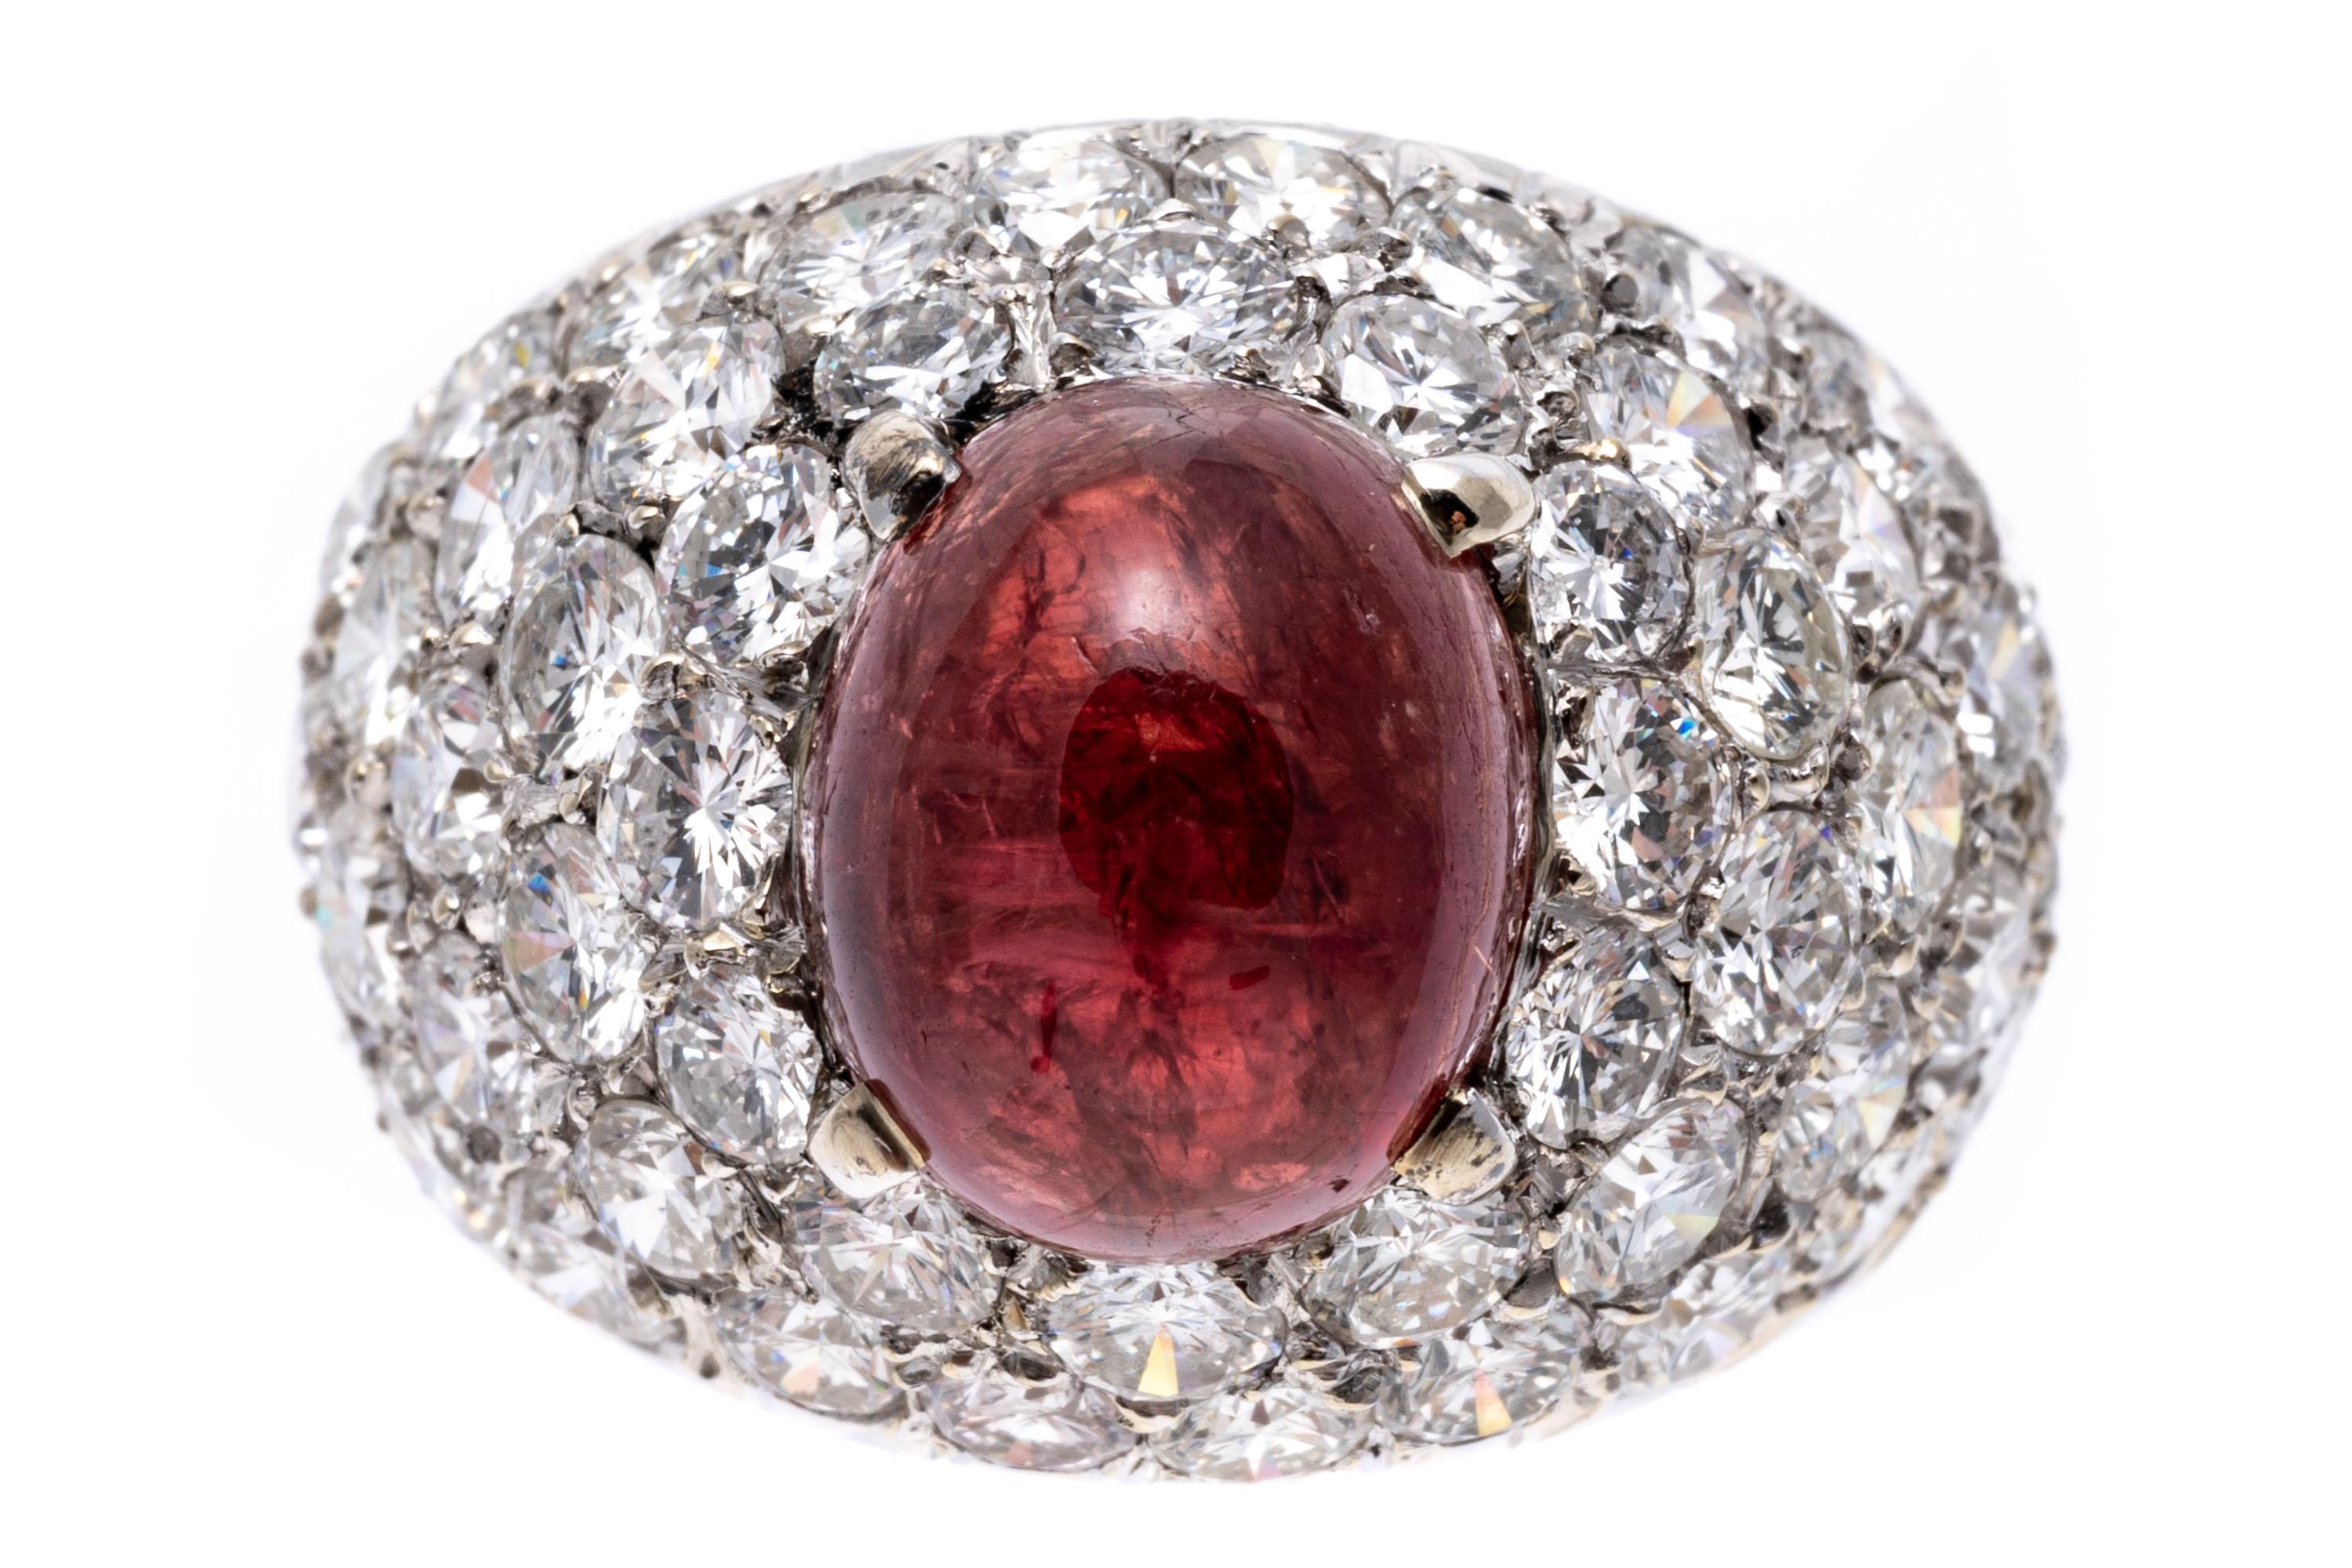 18k Large Cabachon Natural Ruby, 4.54 CTS, and Pave Diamond Dome Ring, GIA Cert For Sale 1